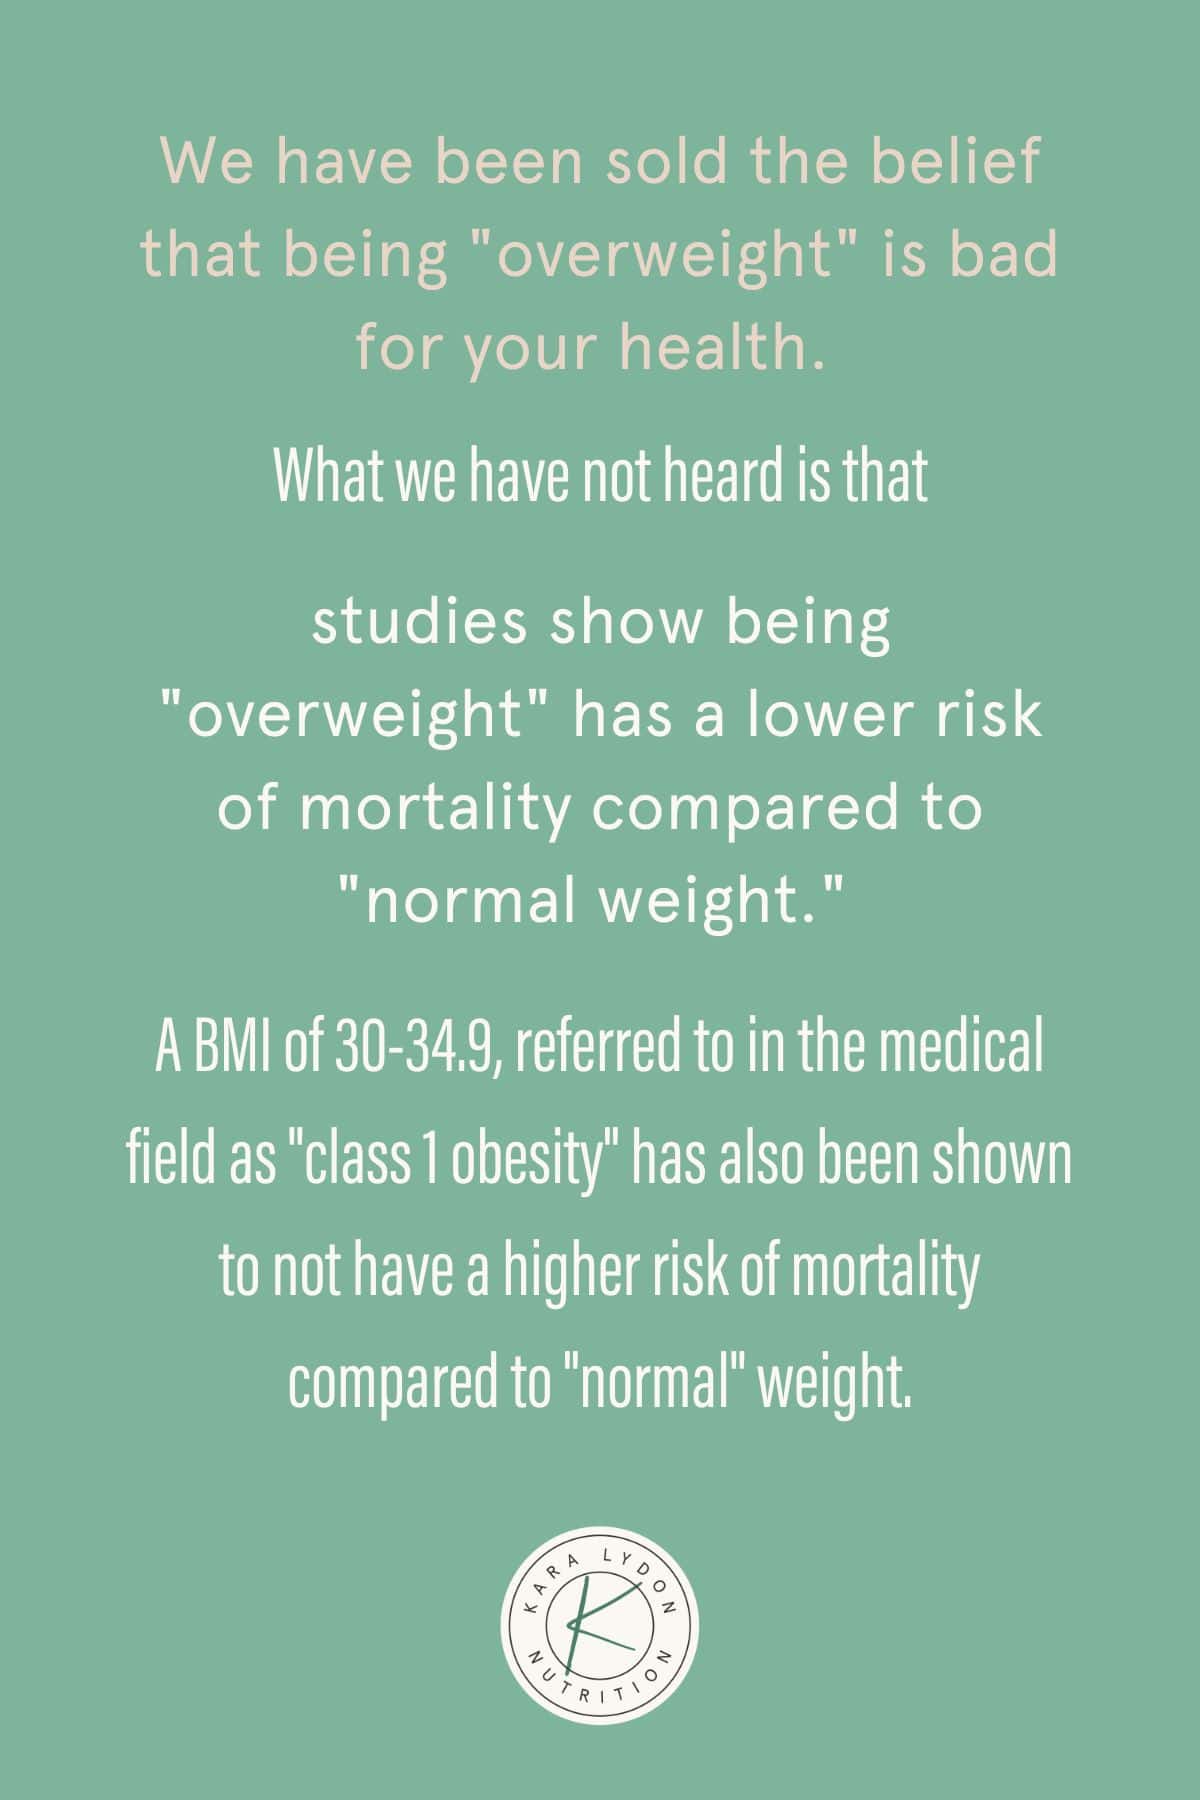 Graphic with quote: "We have been sold the belief that being "overweight" is bad for your health. What we have not heard is that studies show being "overweight" has a lower risk of mortality compared to "normal weight." A BMI of 30-34.9, referred to in the medical field as "class 1 obesity" has also been shown to not have a higher risk of mortality compared to "normal" weight."